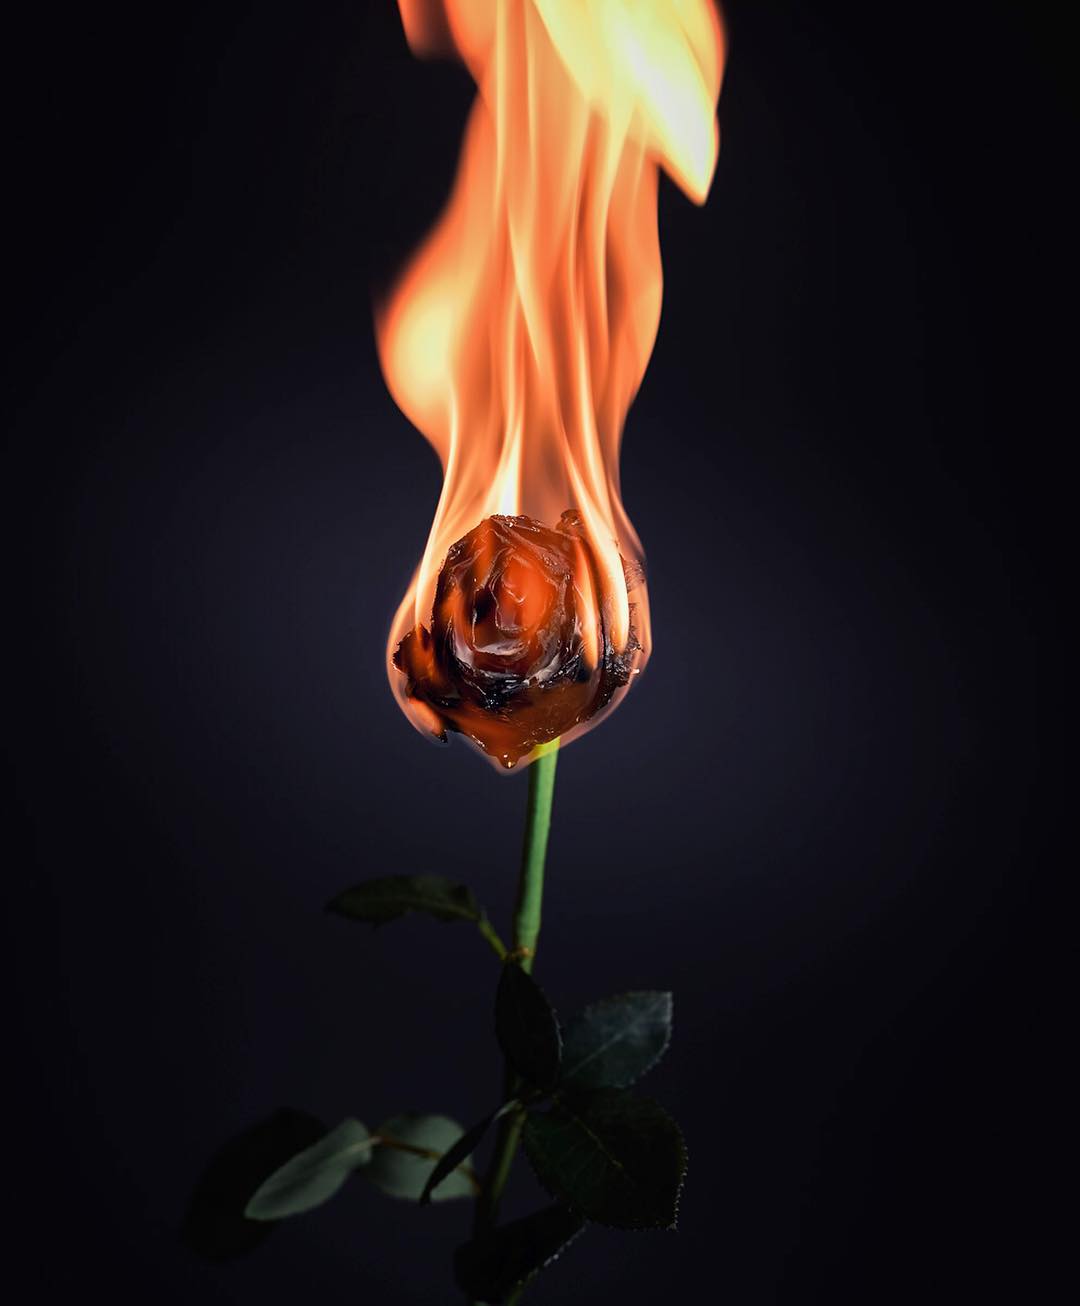 Rosa.  #valentines #love #rose #fire  #nyc #brooklyn